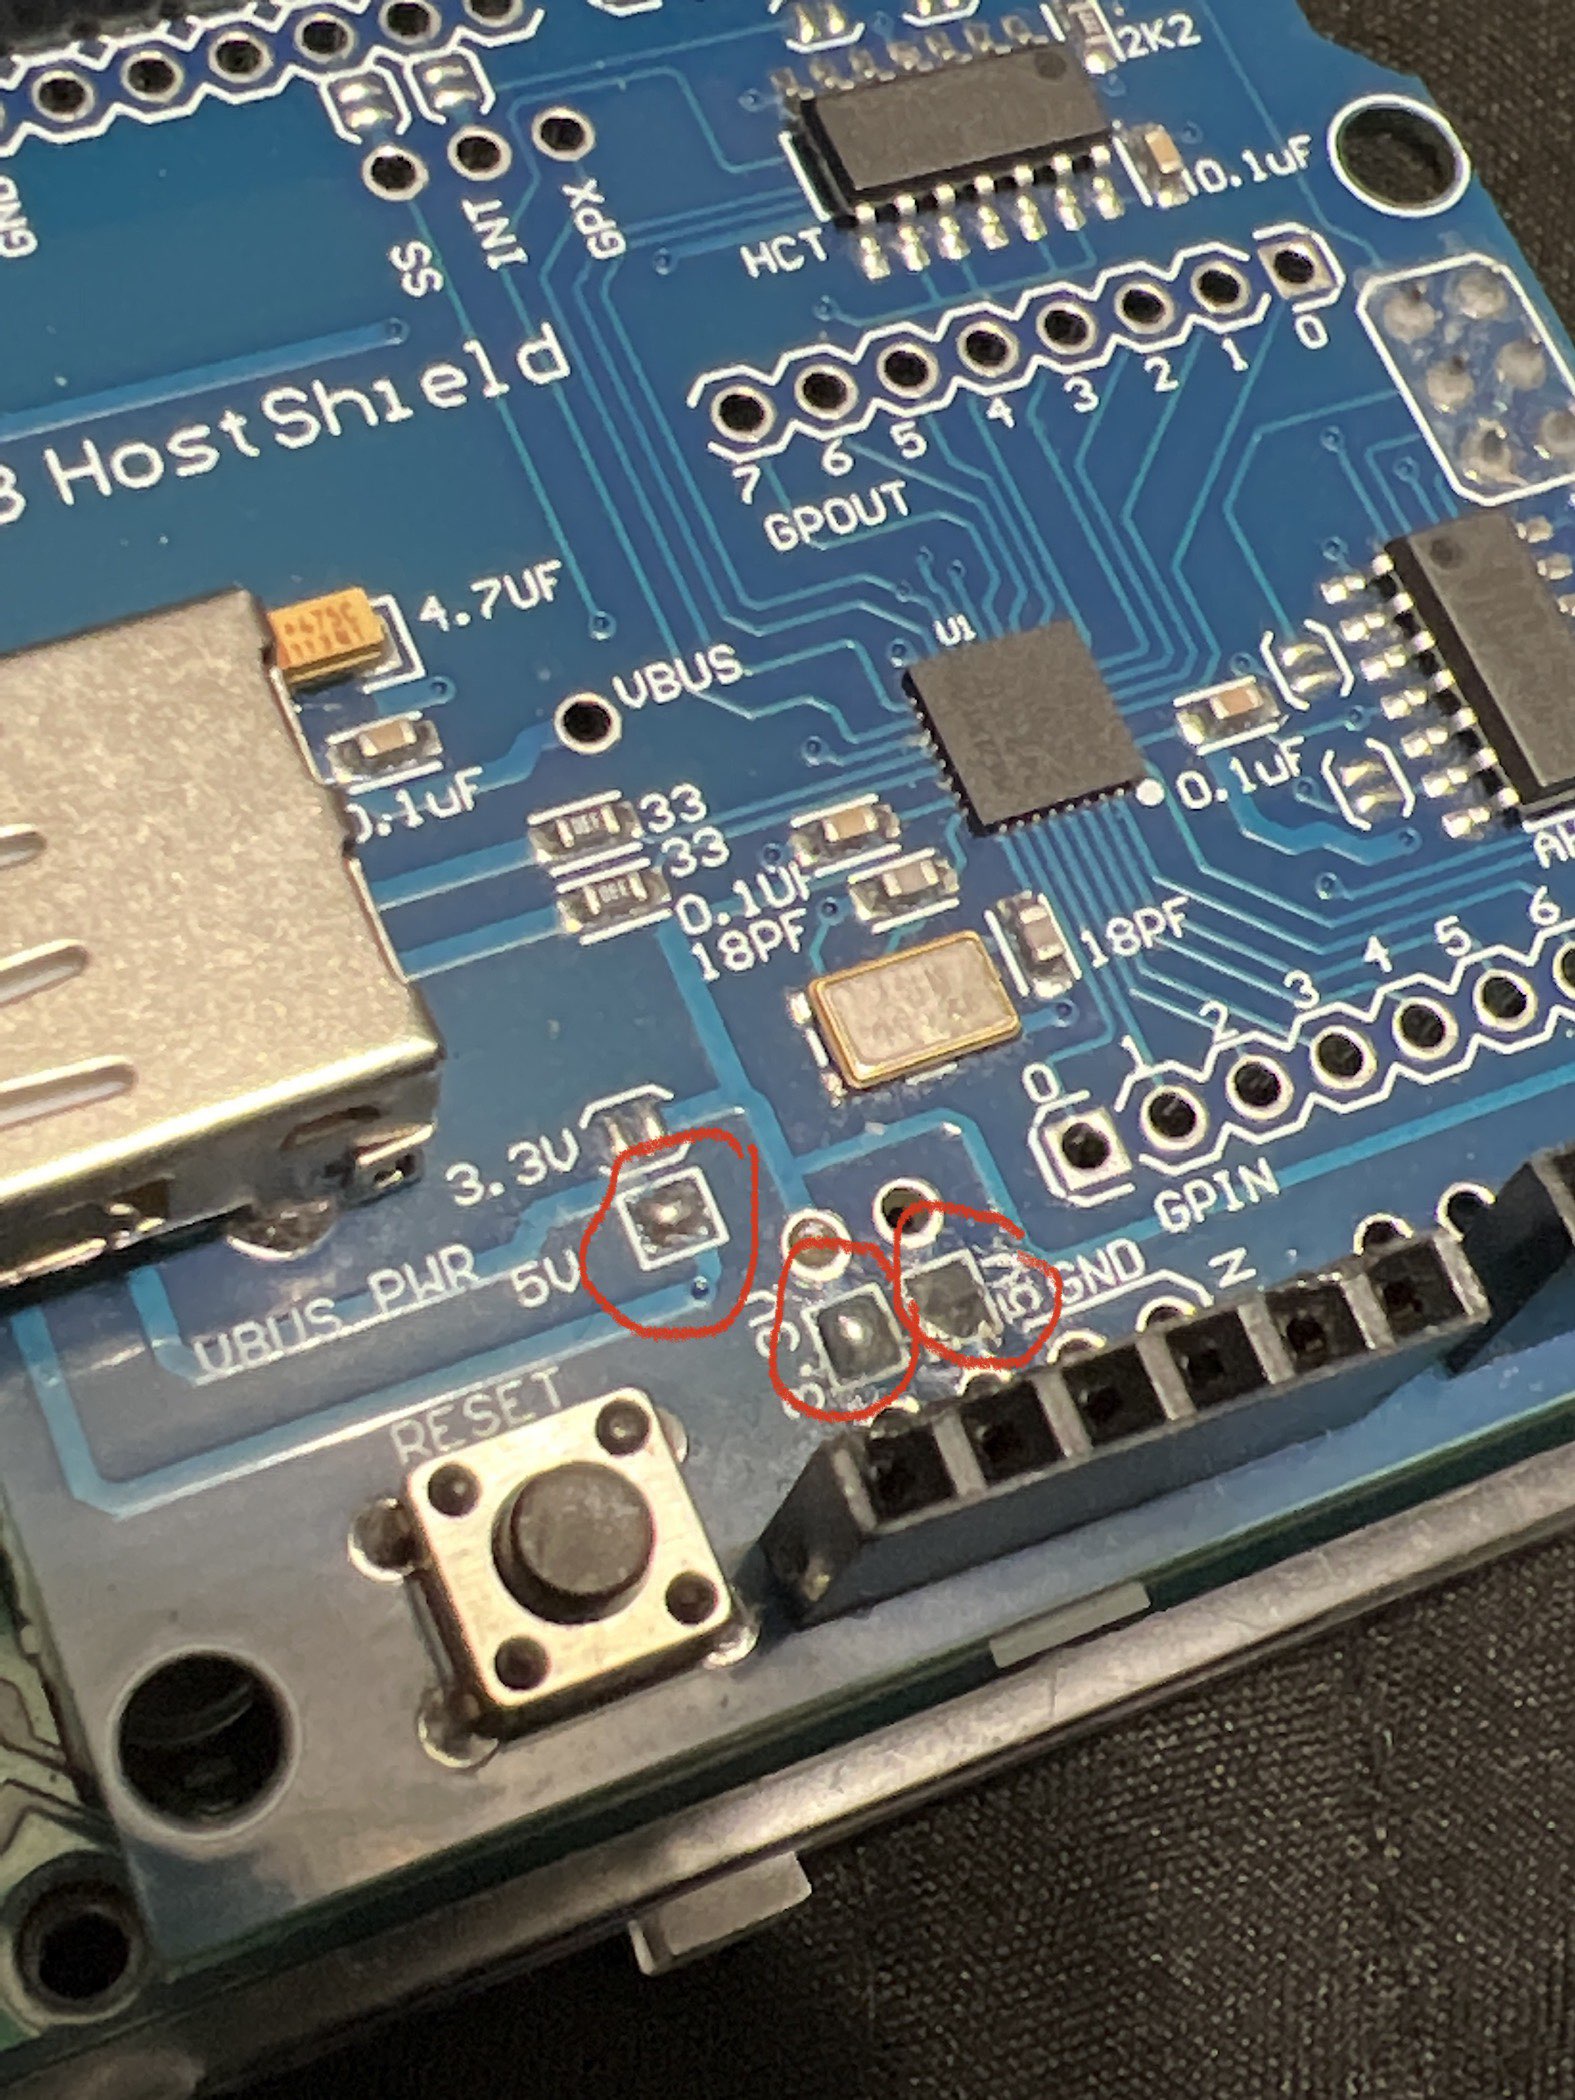 Where to solder to your host shield